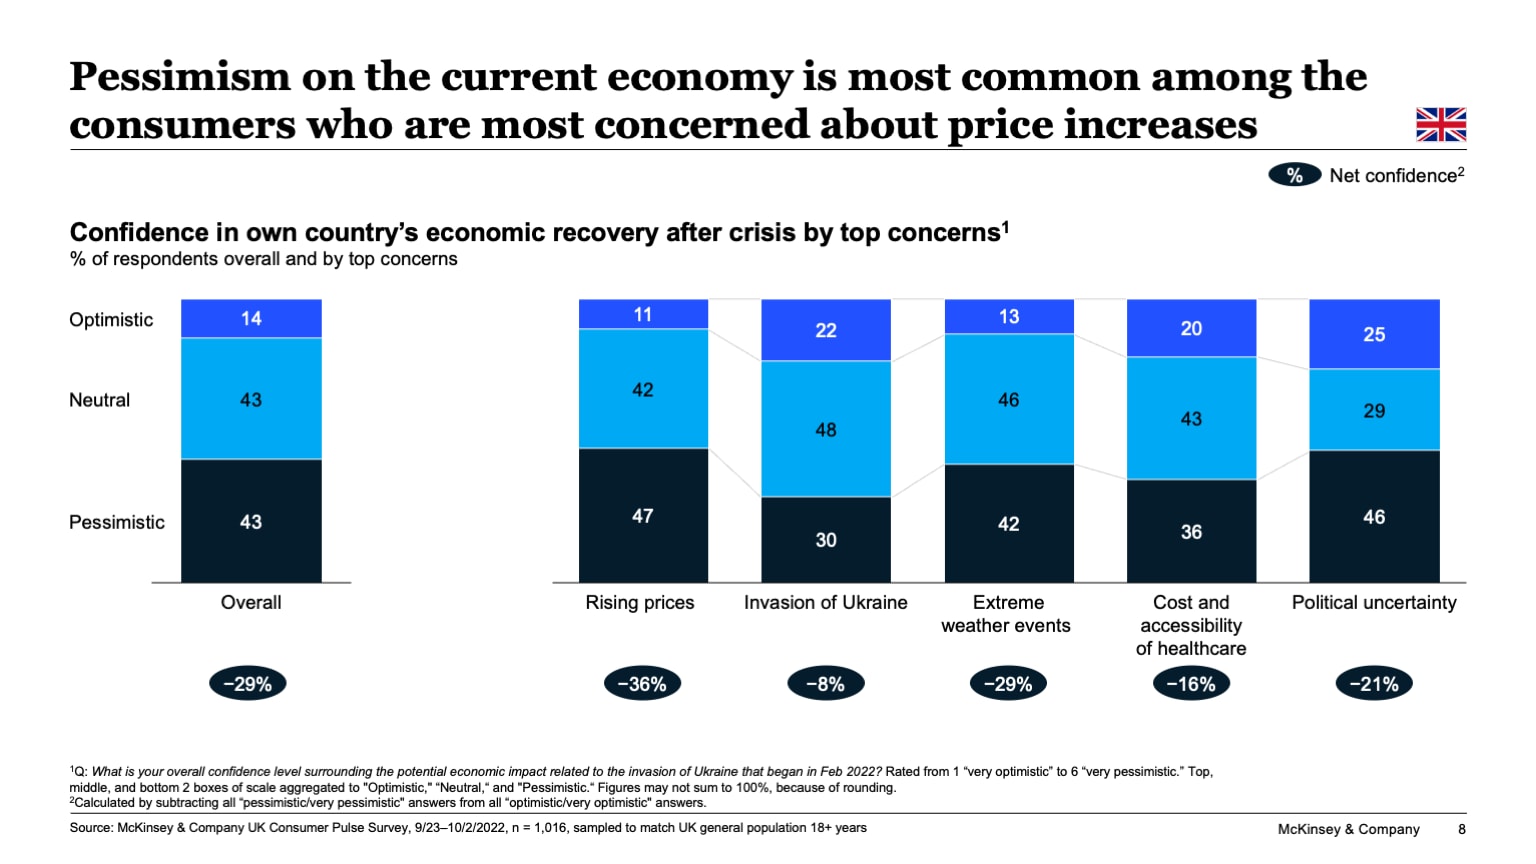 Pessimism on the current economy is most common among the consumers who are most concerned about price increases